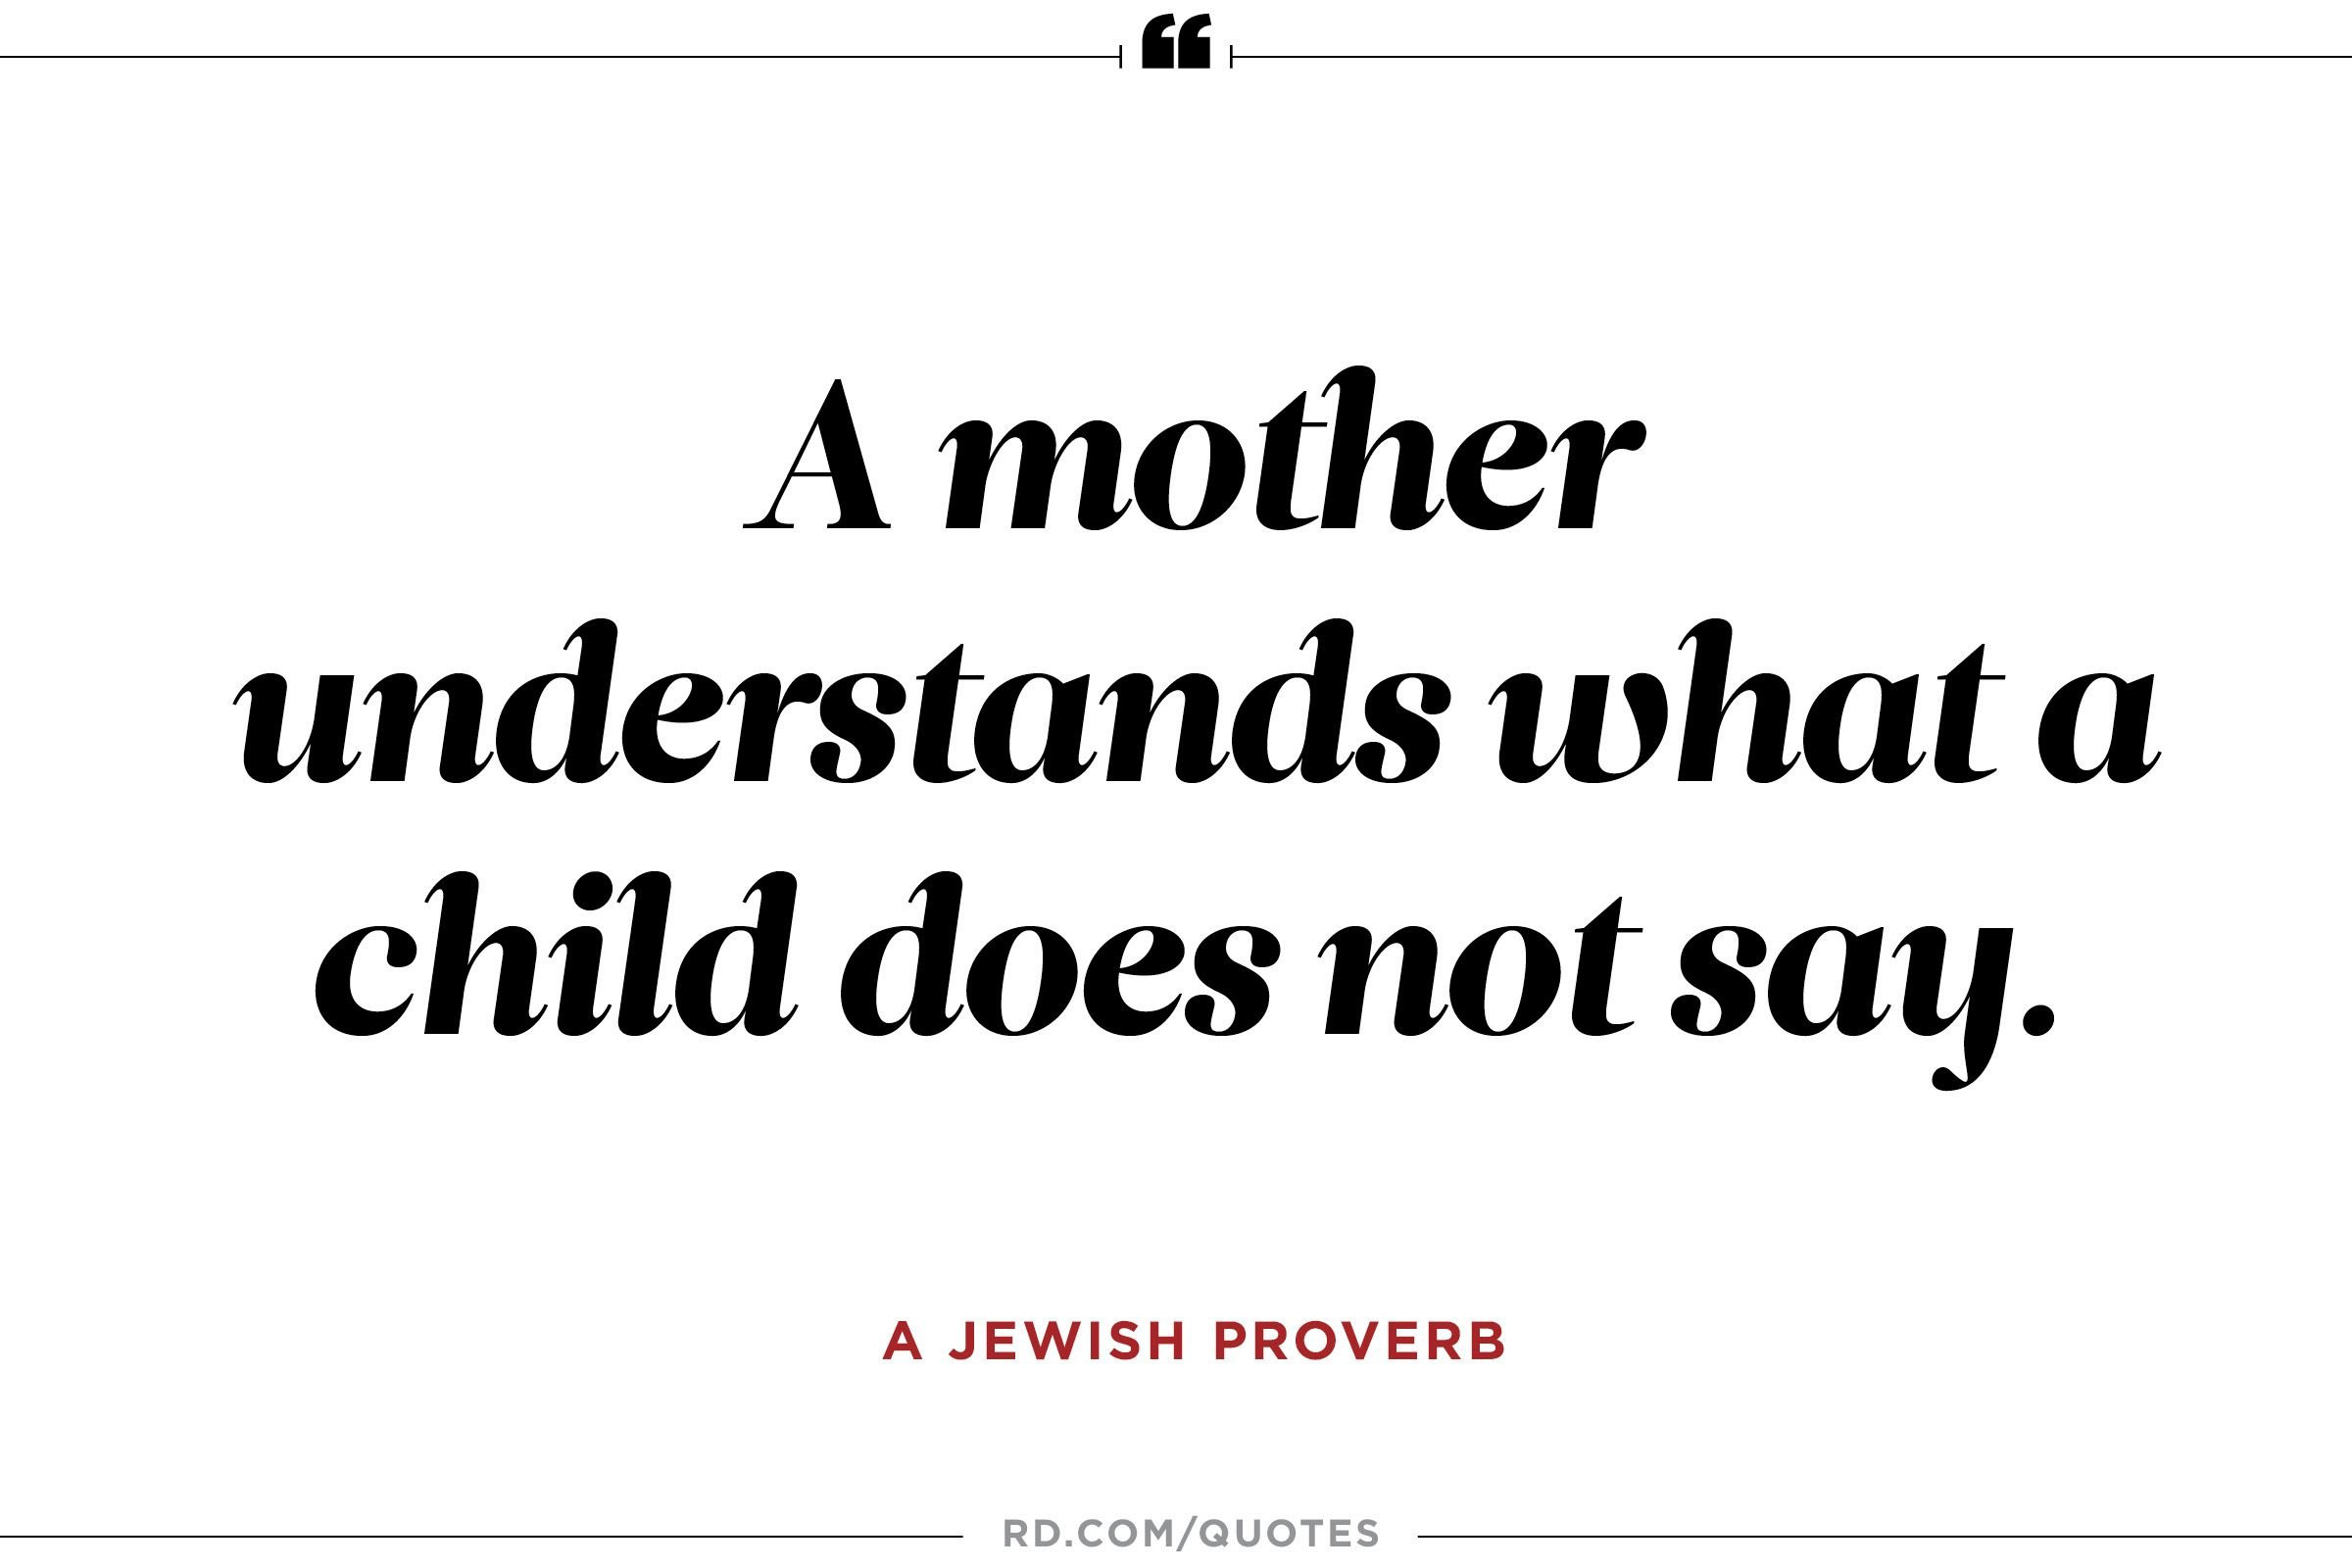 Quotes About Mothers
 11 Quotes About Mothers That ll Make You Call Yours